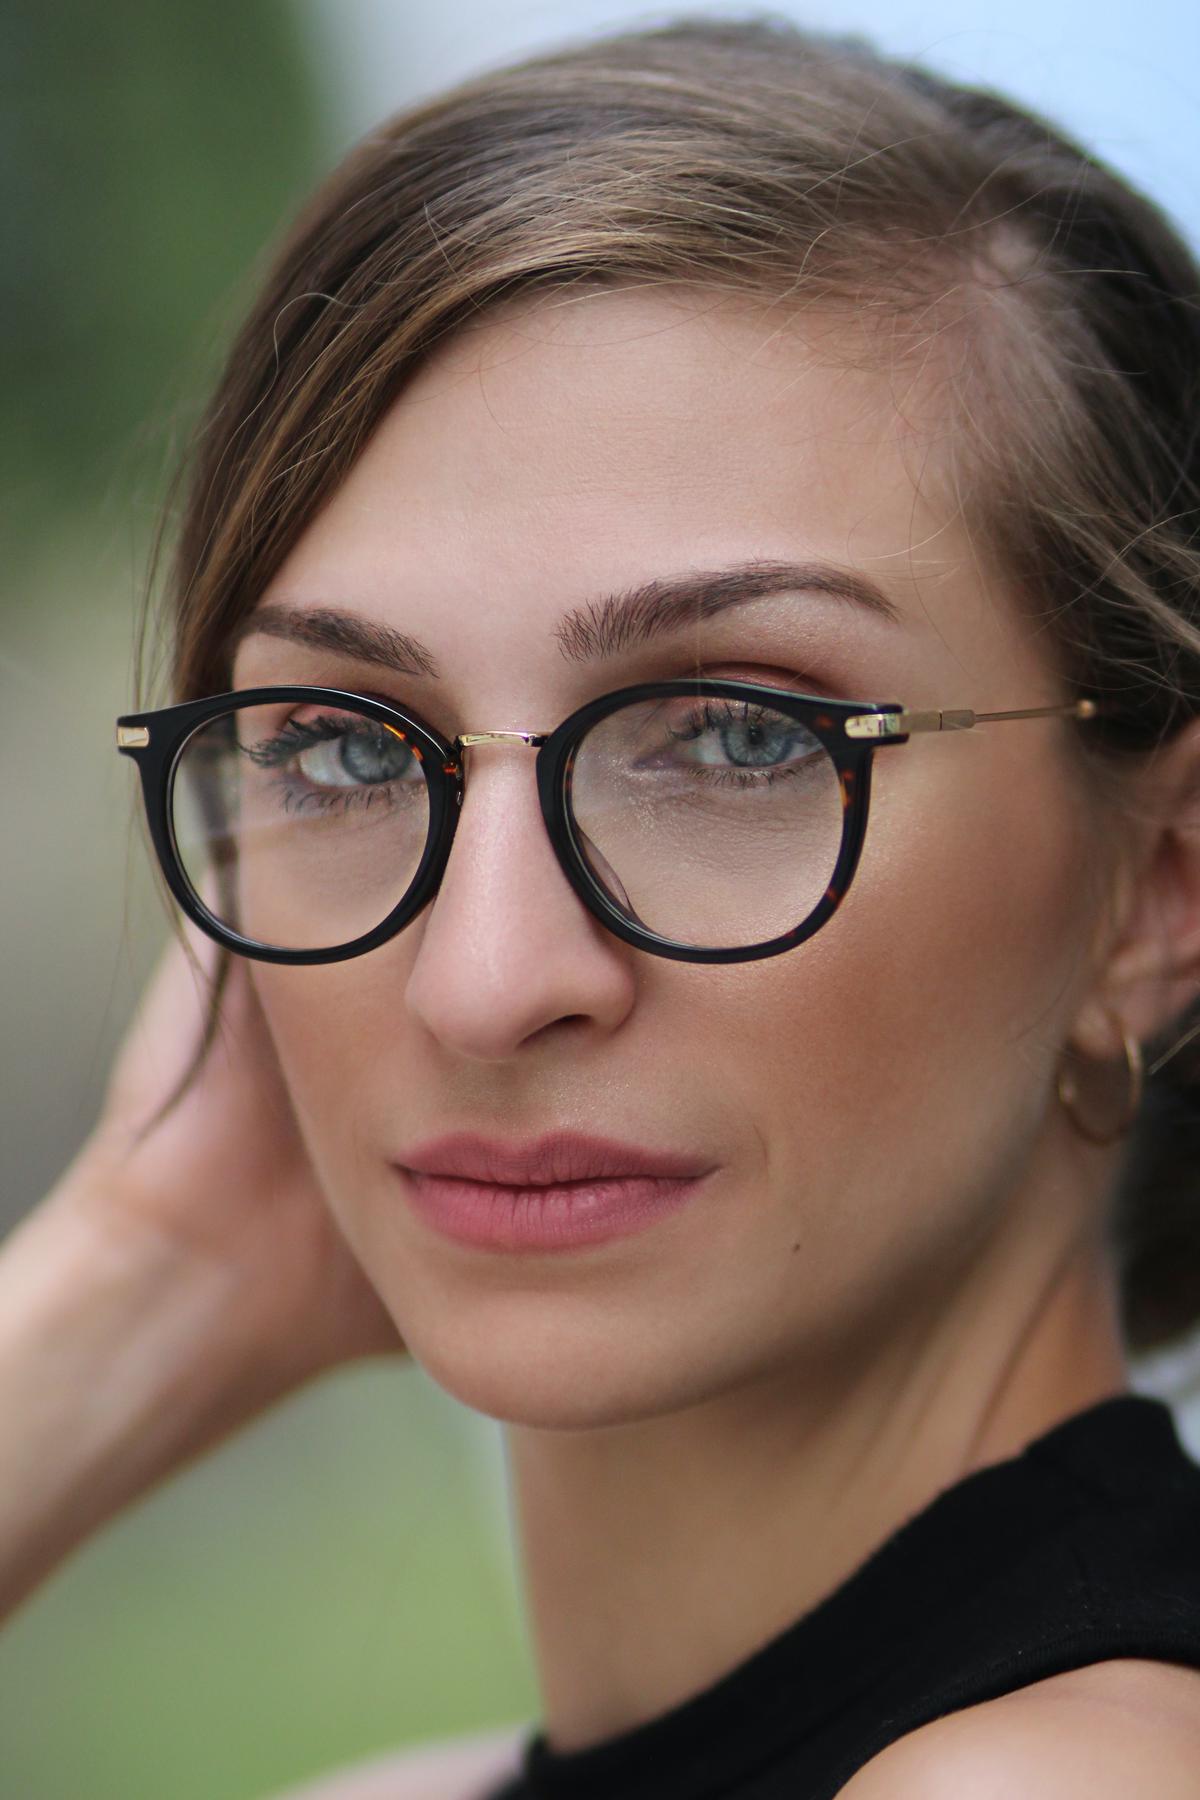 An image depicting a person wearing prescription glasses from Costco Optical.